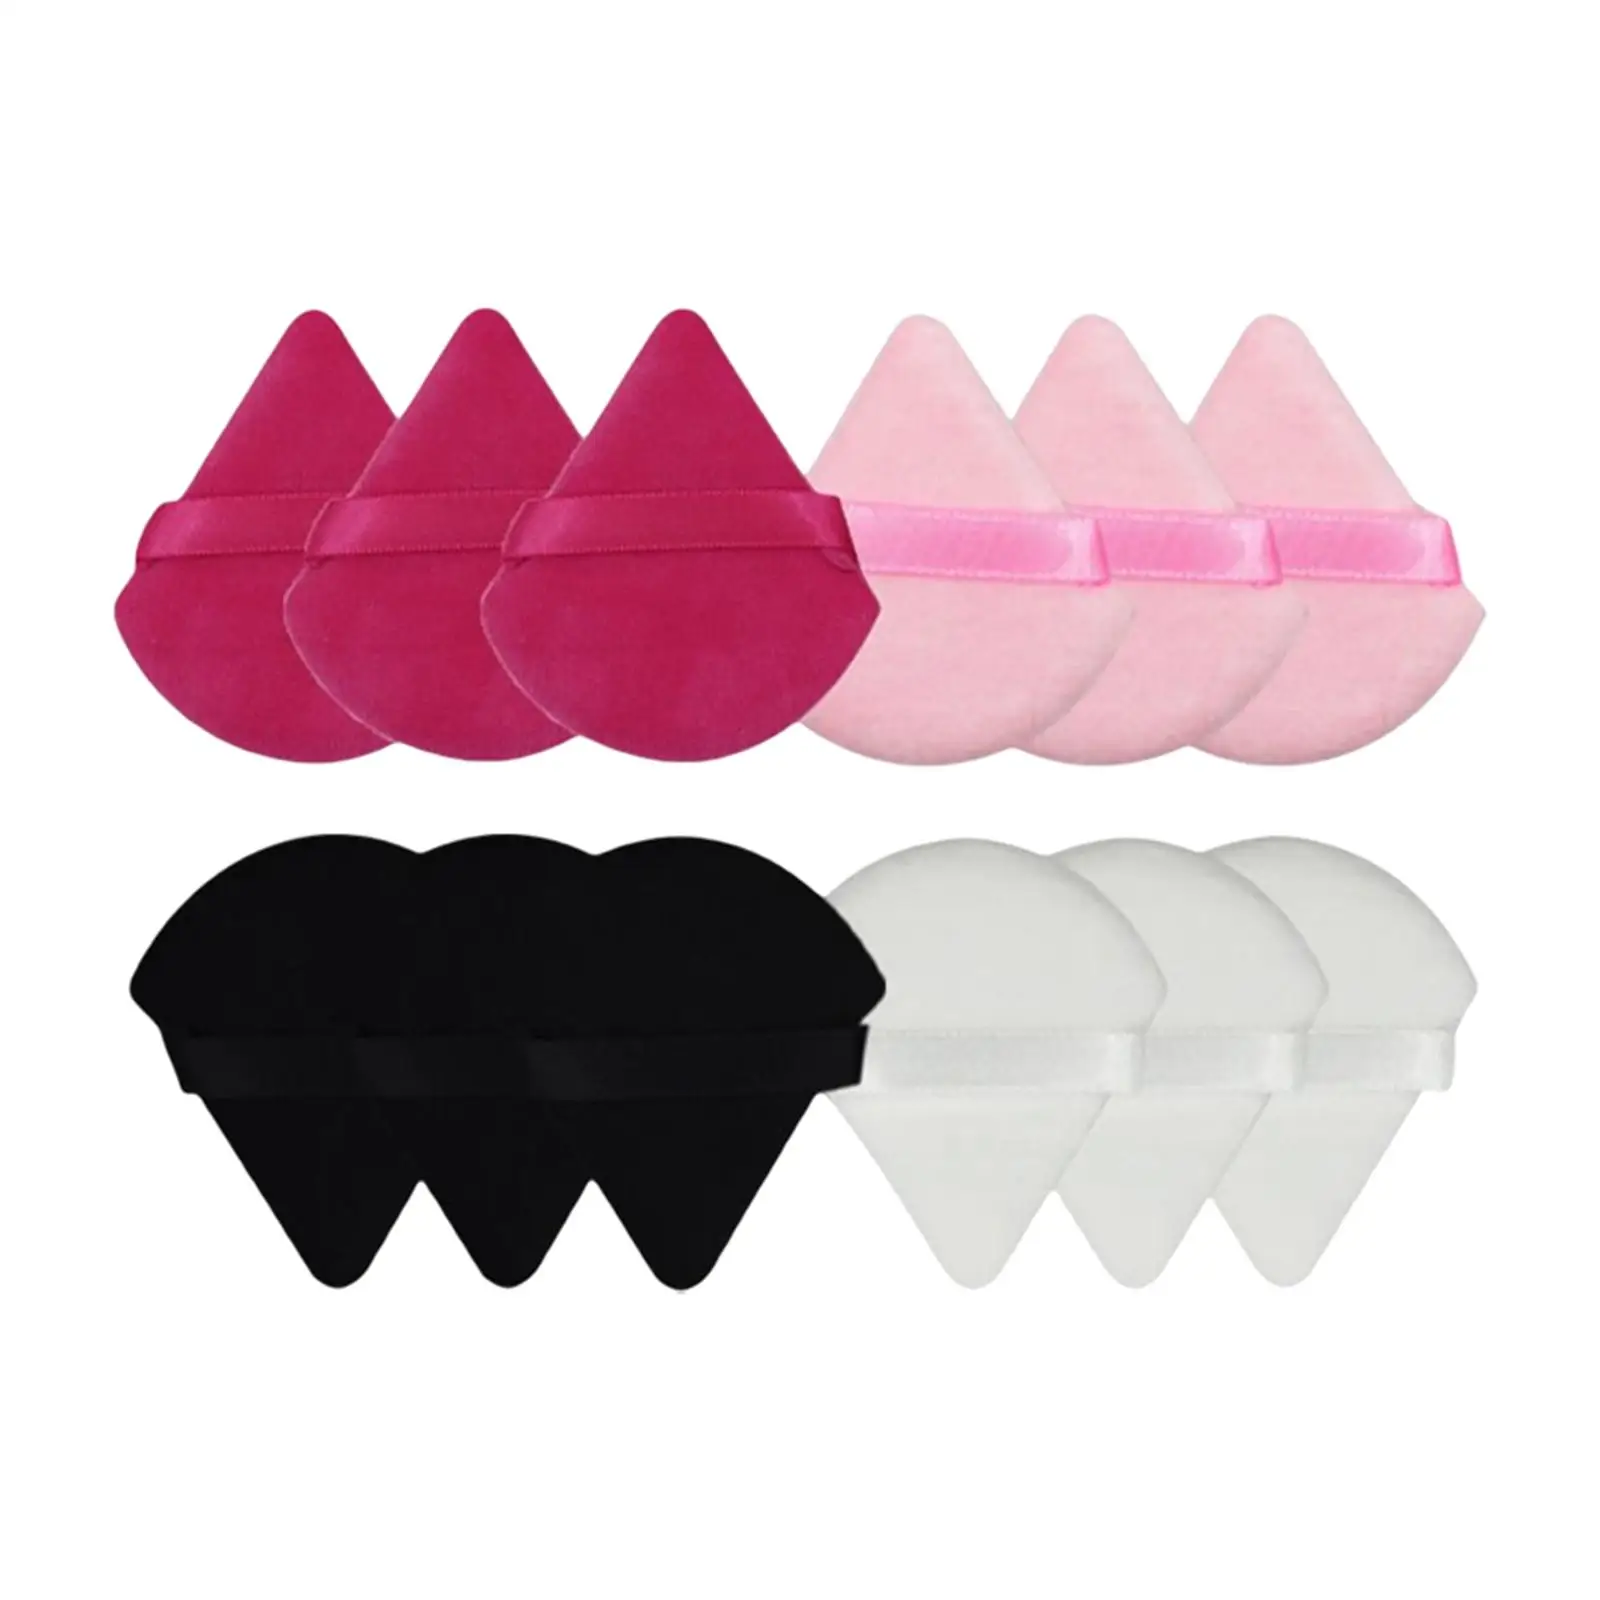 1Set Triangle Powder Beauty Makeup Tool Soft Makeup Puff for Loose Powder Eye Shadow Under Eyes Corners Contouring Face